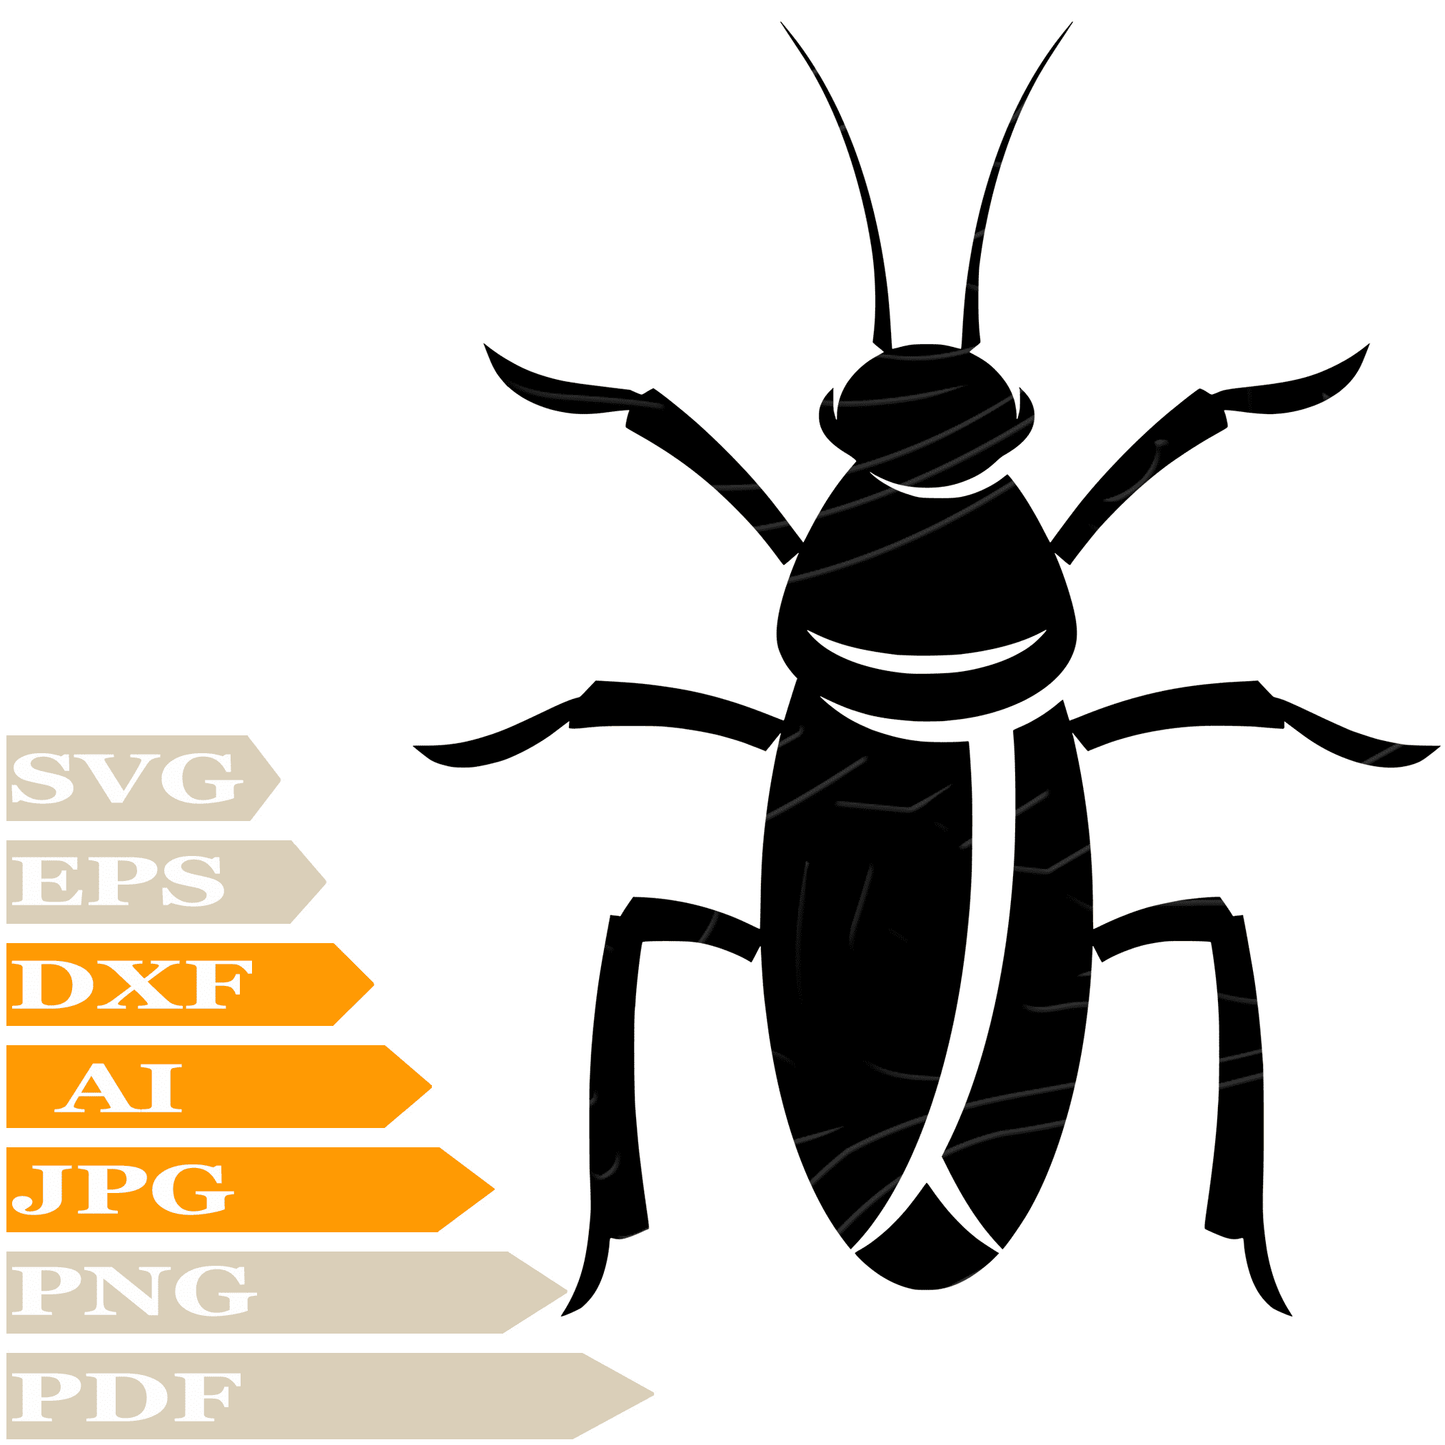 Cockroach SVG-American Cockroach SVG File-Black Cockroach Drawing SVG-Cockroach Insect Vector Graphics-Clip Art-Image Cut File-Illustration-PNG-For Cricut -Instant download-For Shirts-Silhouette